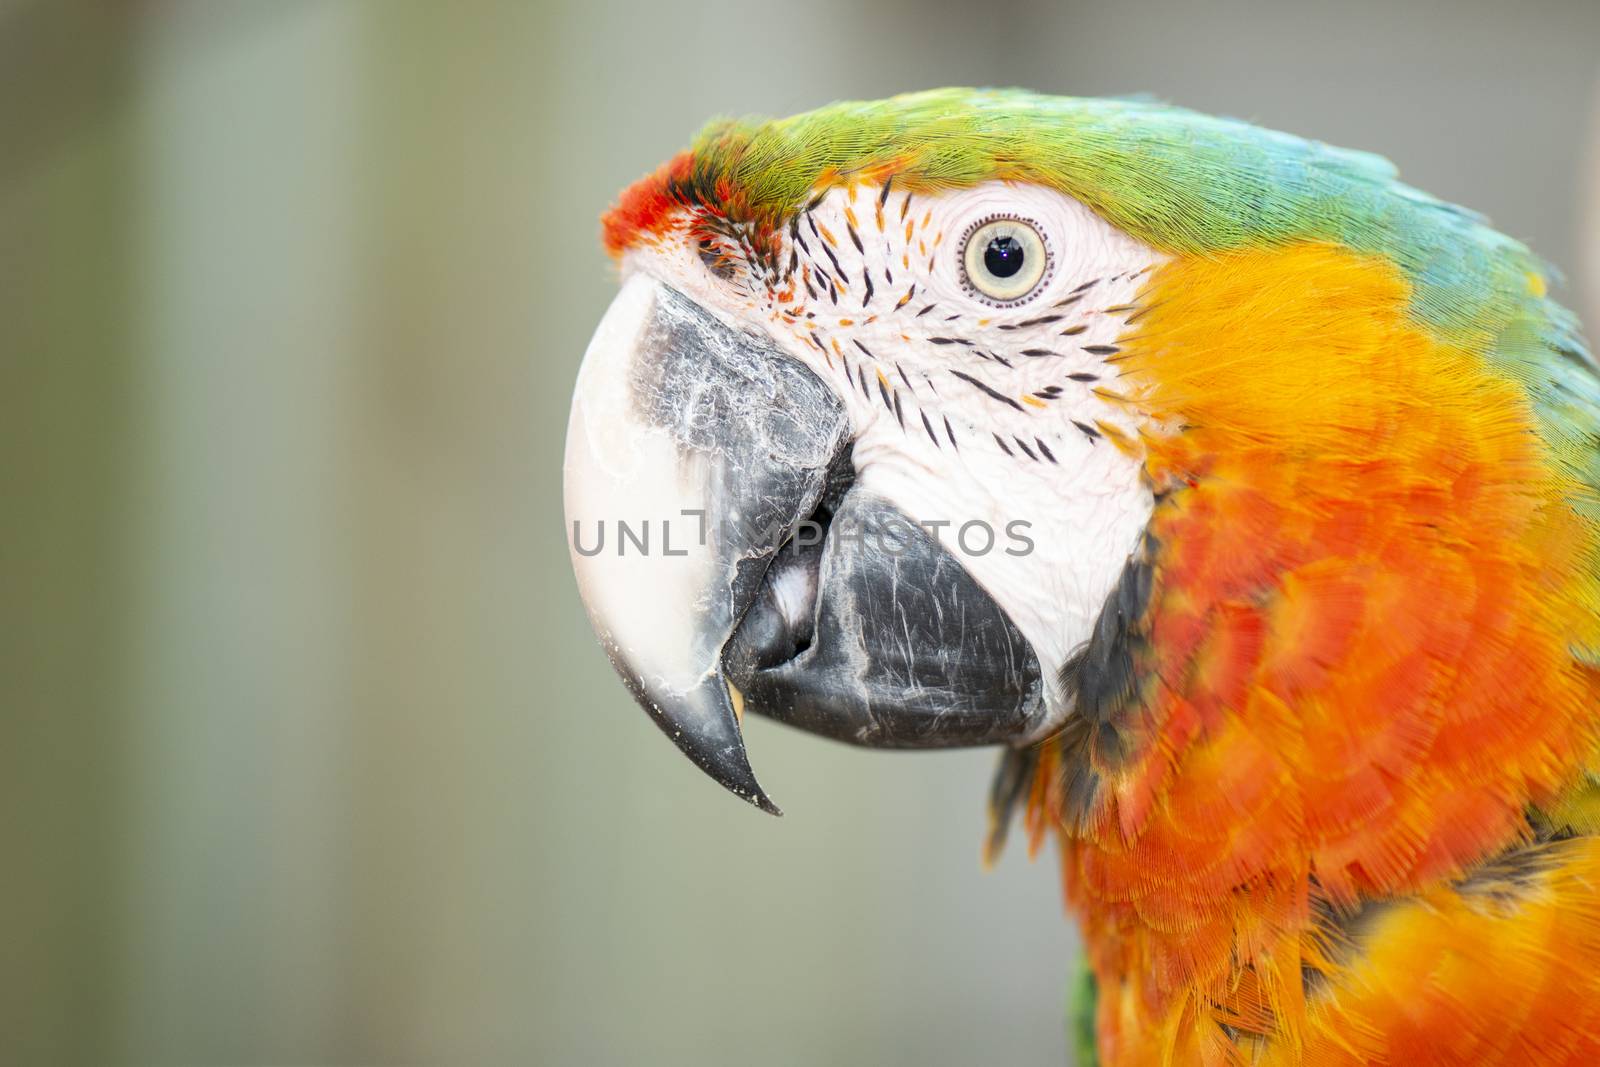 Close up of a large macaw bird during the day.